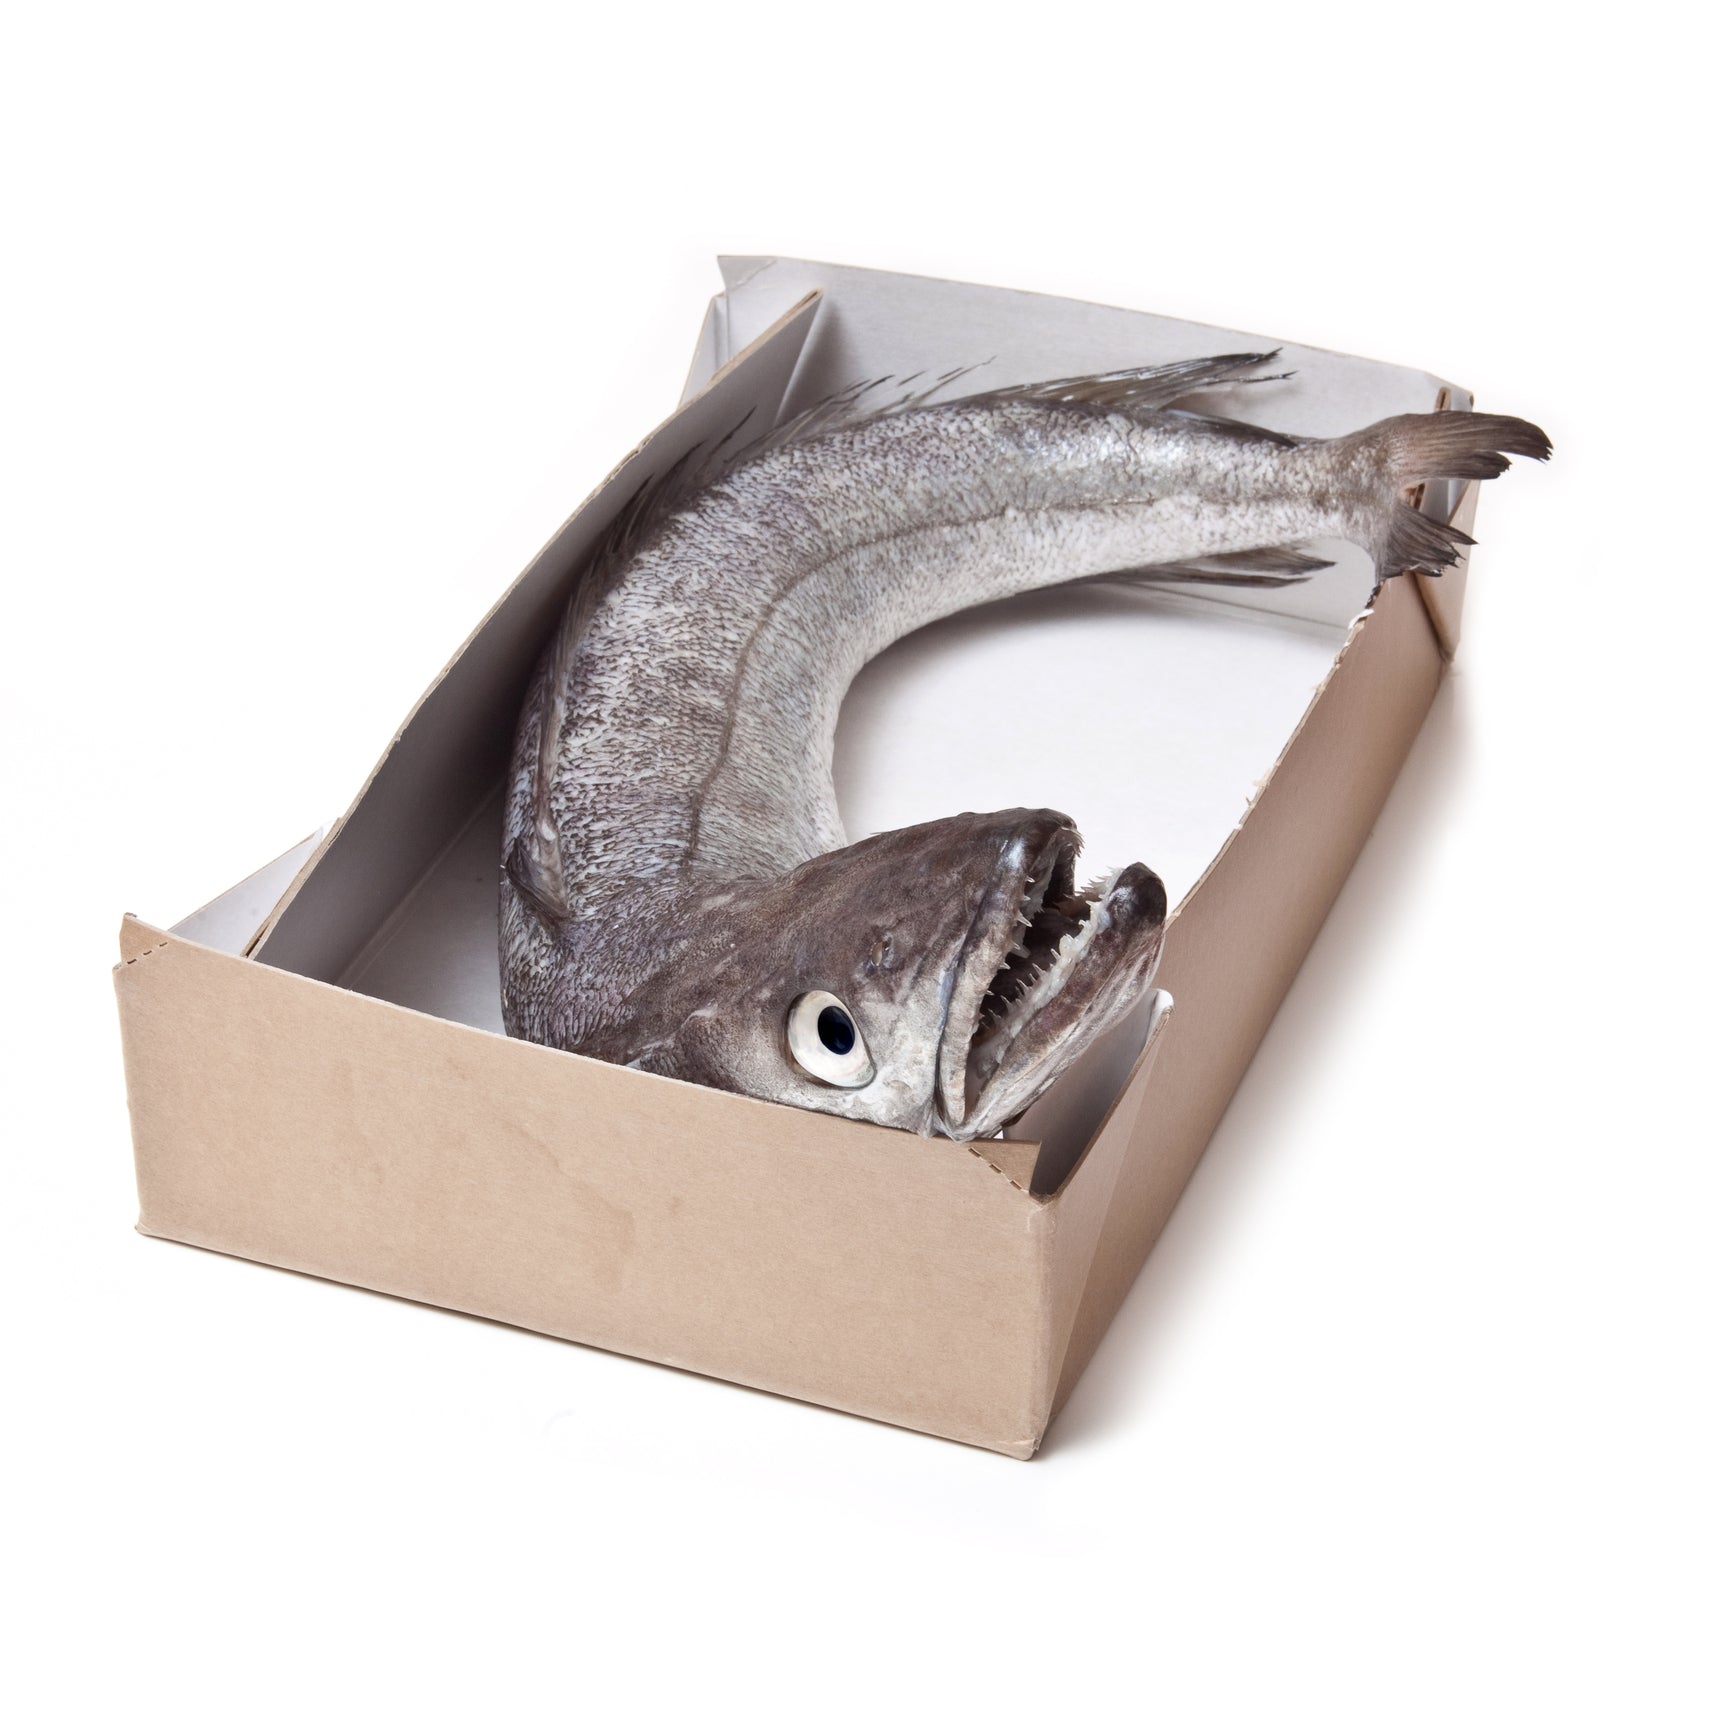 Pacific Whiting Nutrition: What You Need to Know